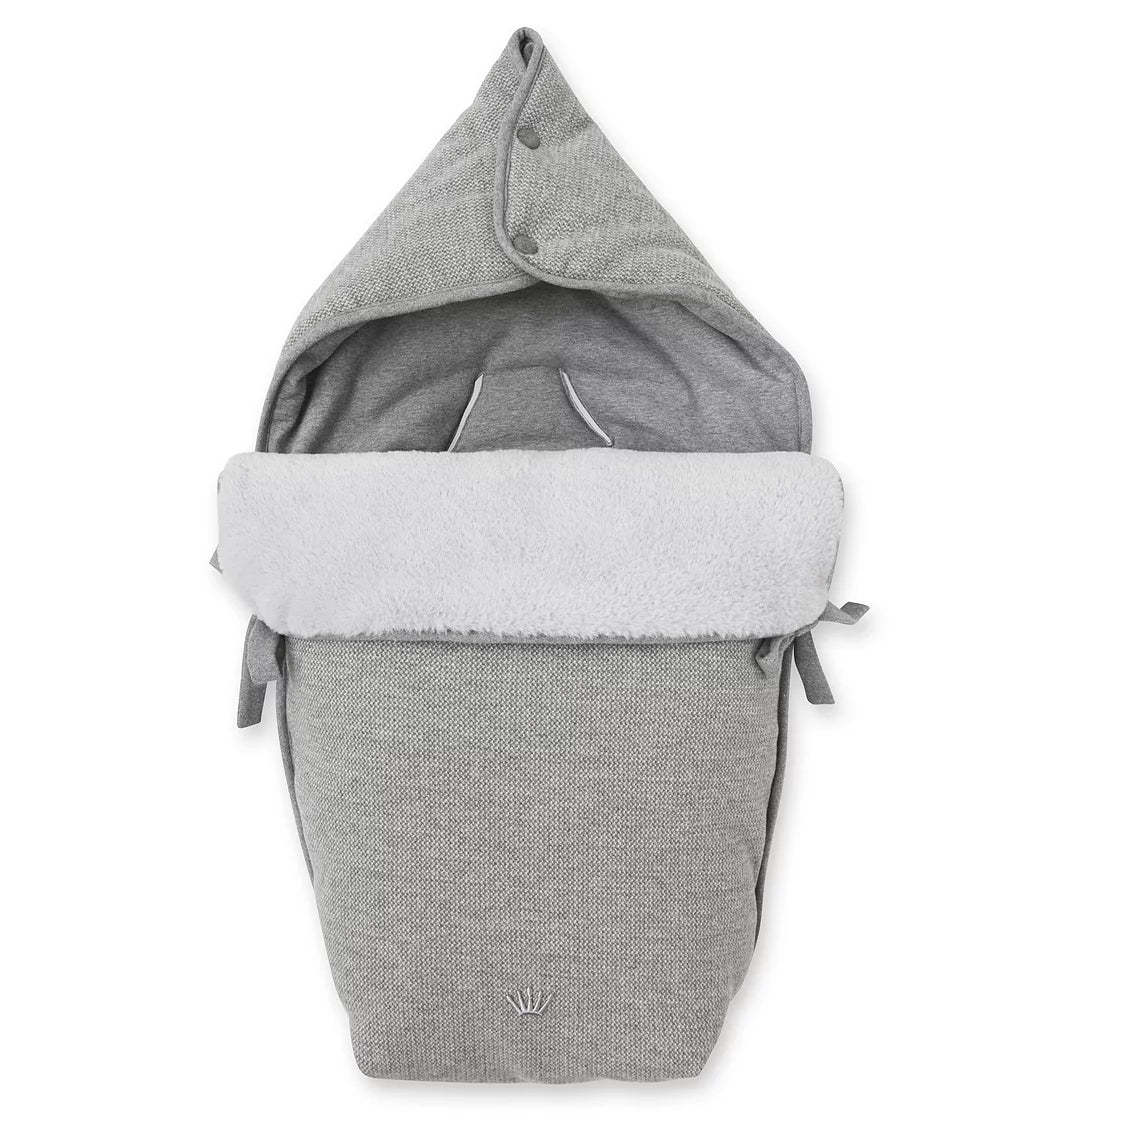 First Endless Grey Angels Nest for Car Seat - Grey Flanel Jersey